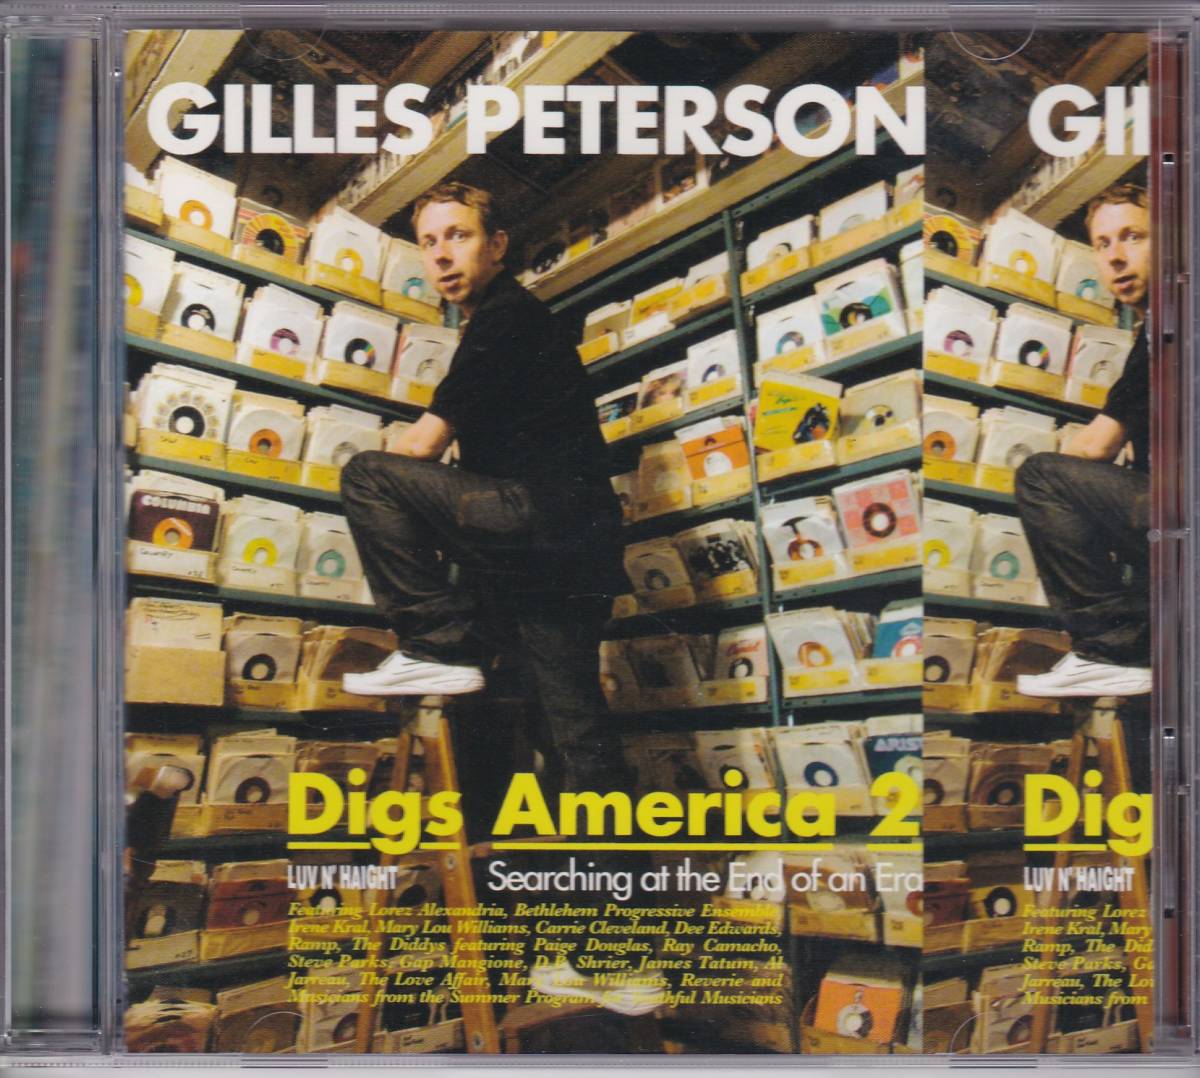 Rare Groove/ジャズ/ソウル/ファンク■V.A. / Gilles Peterson Digs America 2 (2007) 廃盤 レア度100%のお宝音源満載の極上コンピ第2弾!! _画像1